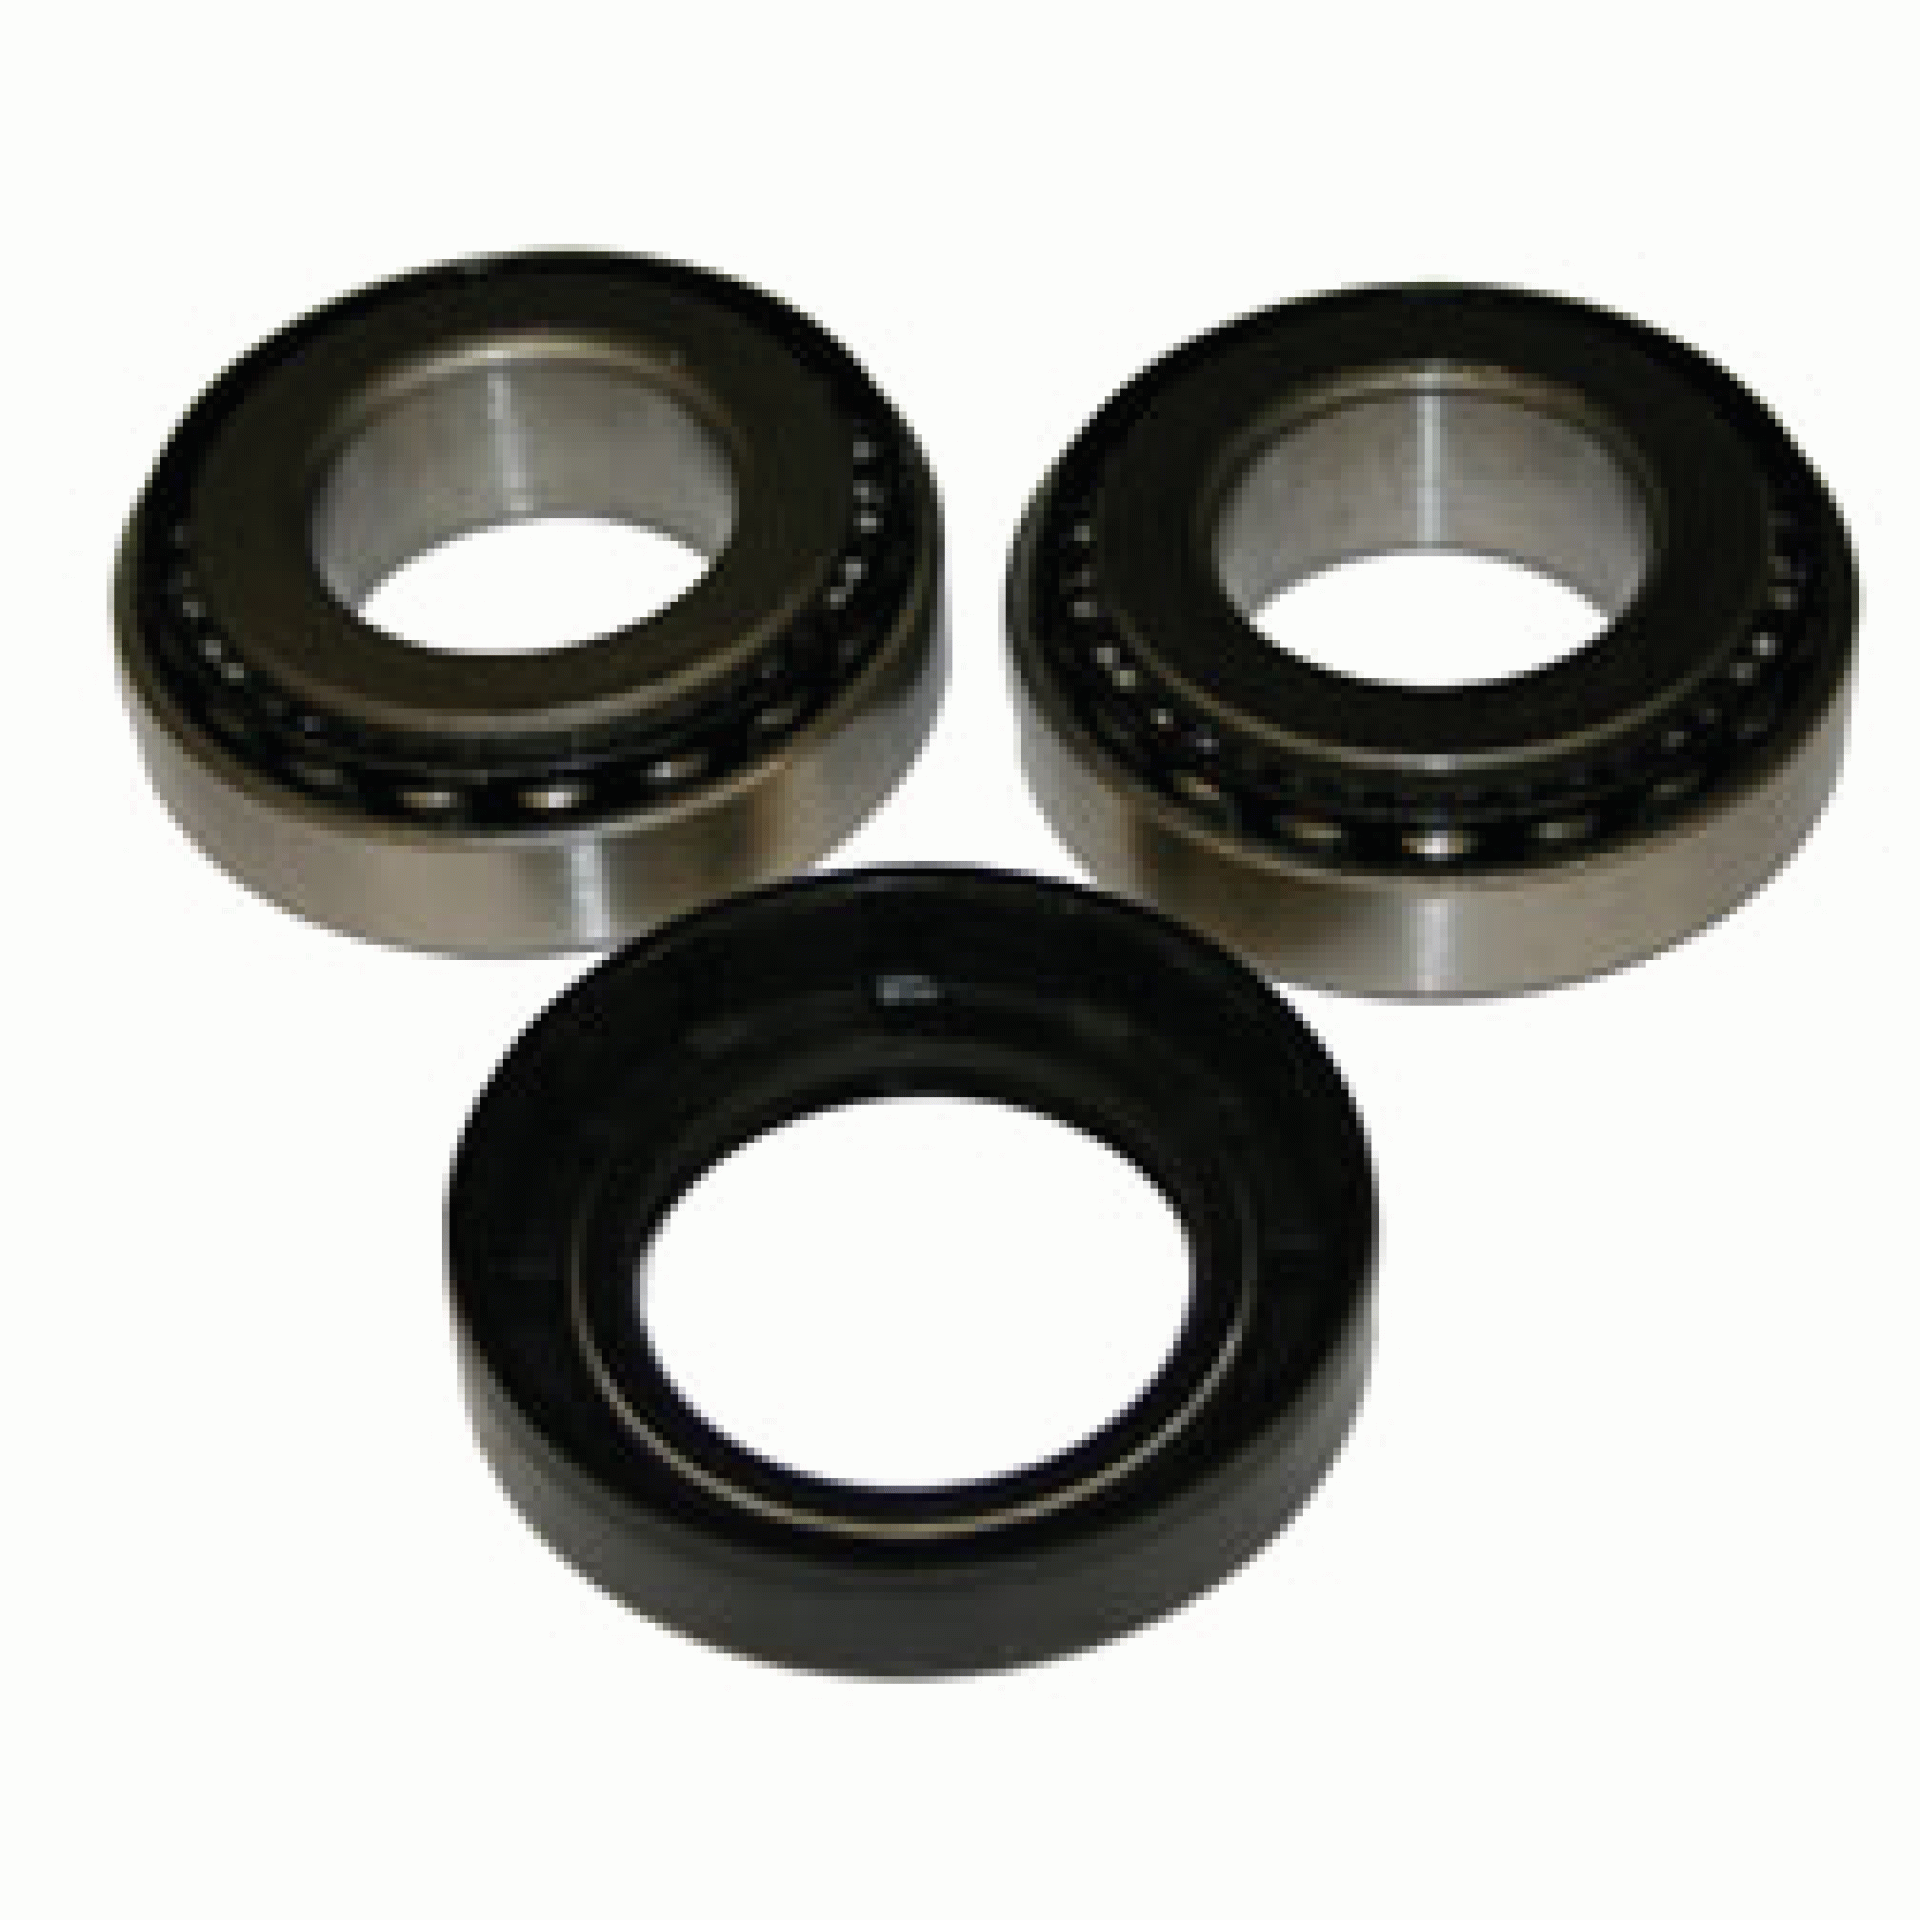 DEXTER MARINE PRODUCTS OF GEORGIA LC | K71-G02-22 | BEARING KIT- 1-1/4" STRAIGHT SPINDLE W/O DUST CAP LM67048 CONE LM67010 CUP